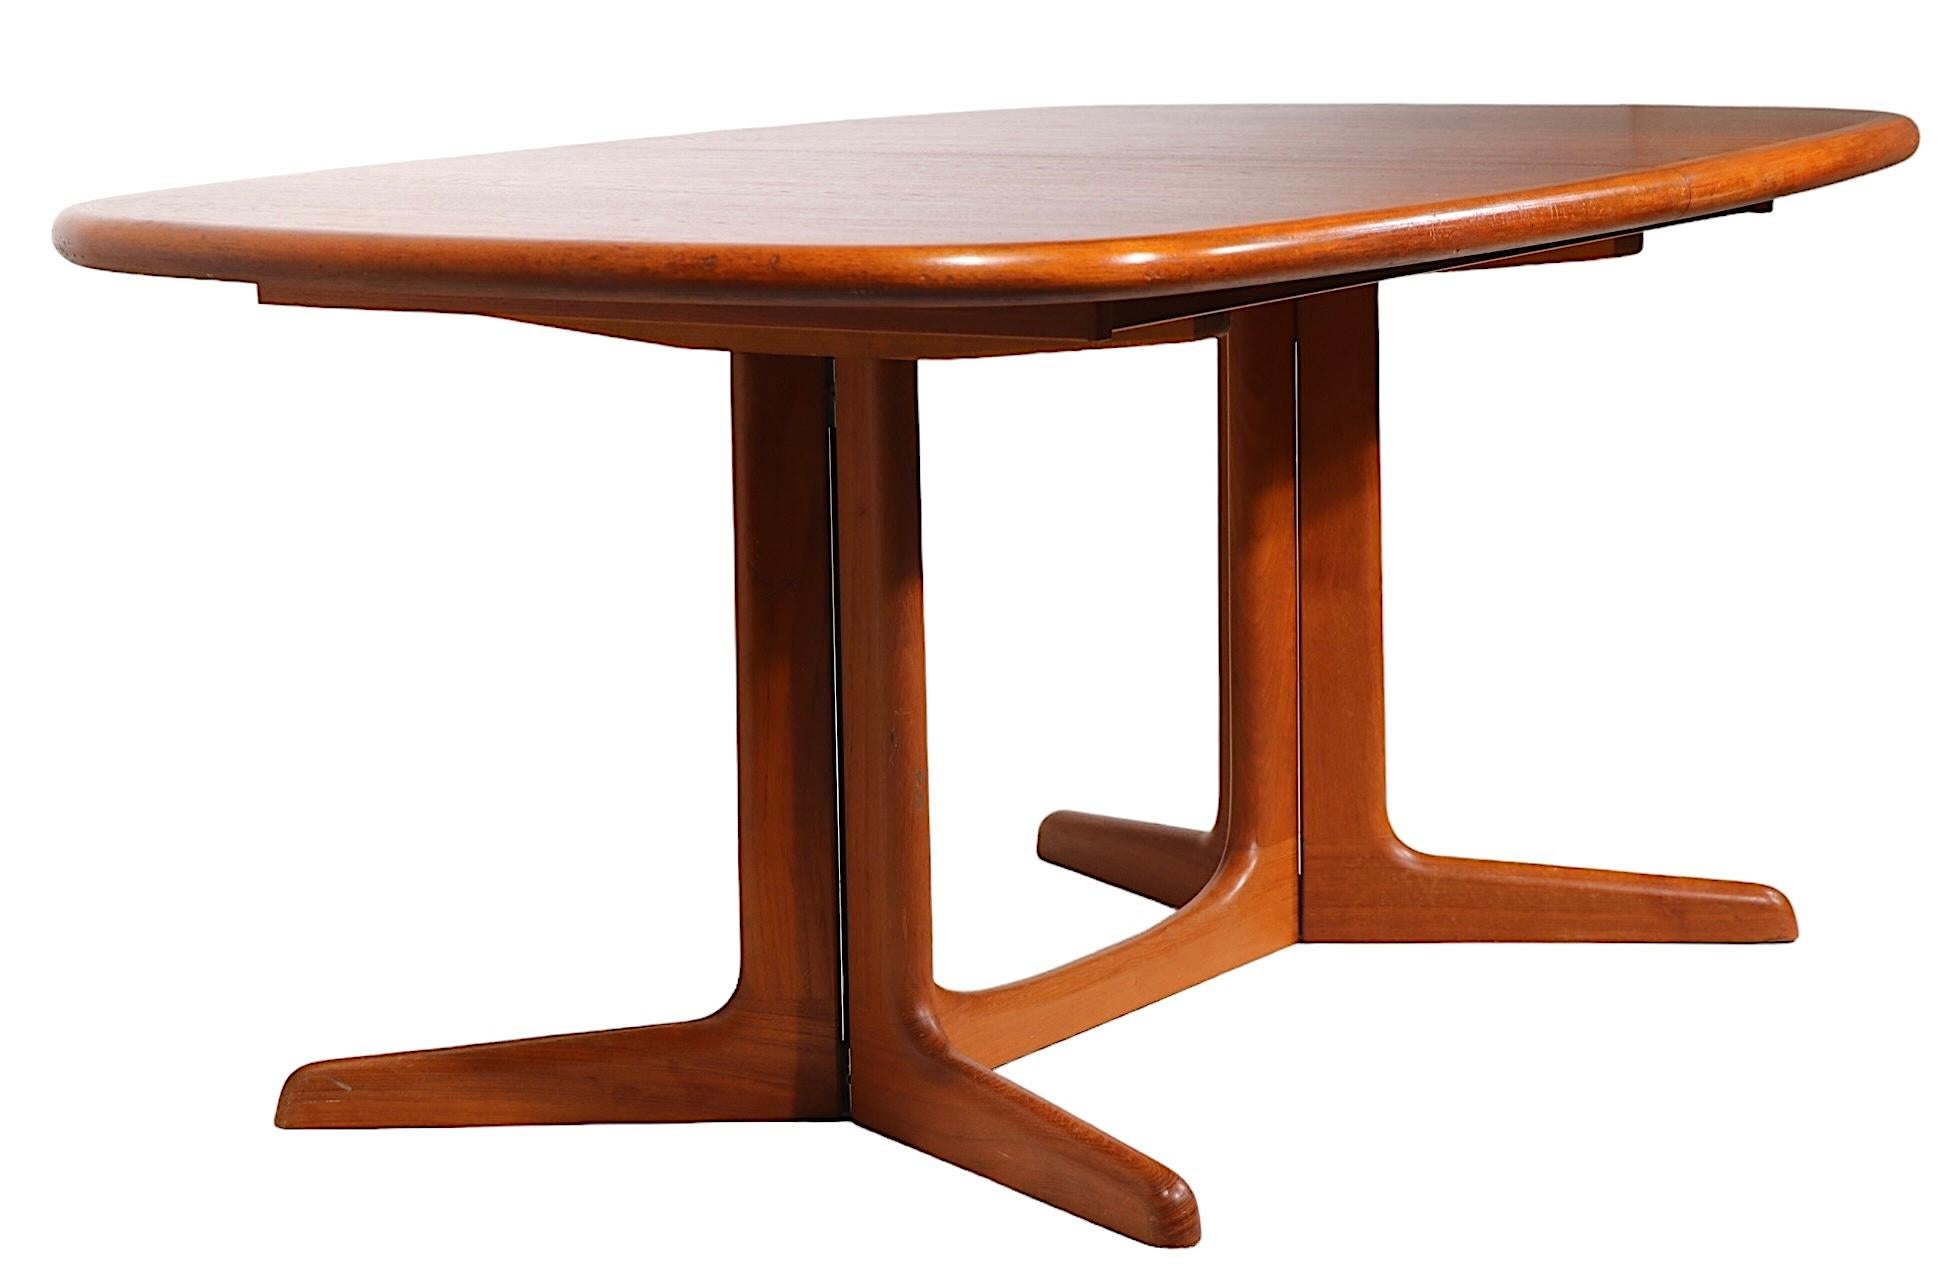 Danish Mid Century Oval Teak Dining Table by Niels Otto Moller for Gudme c 1970s For Sale 4